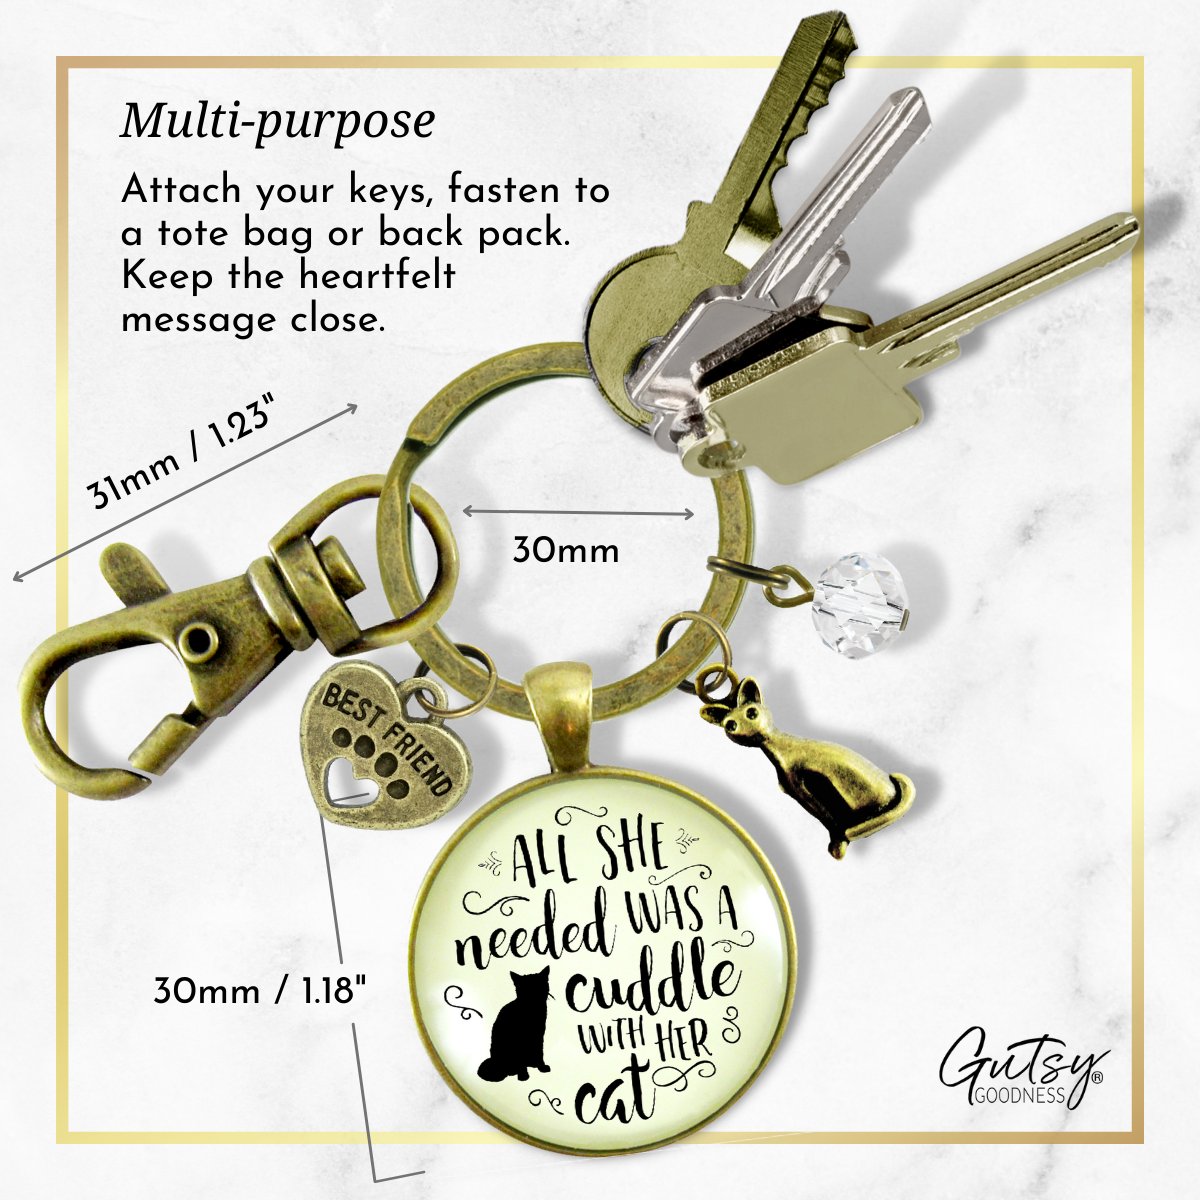 Cat Keychain All She Needed Was Cuddle Gift Quote Kitty Lover Related Cat Jewelry For Women - Gutsy Goodness Handmade Jewelry;Cat Keychain All She Needed Was Cuddle Gift Quote Kitty Lover Related Cat Jewelry For Women - Gutsy Goodness Handmade Jewelry Gifts